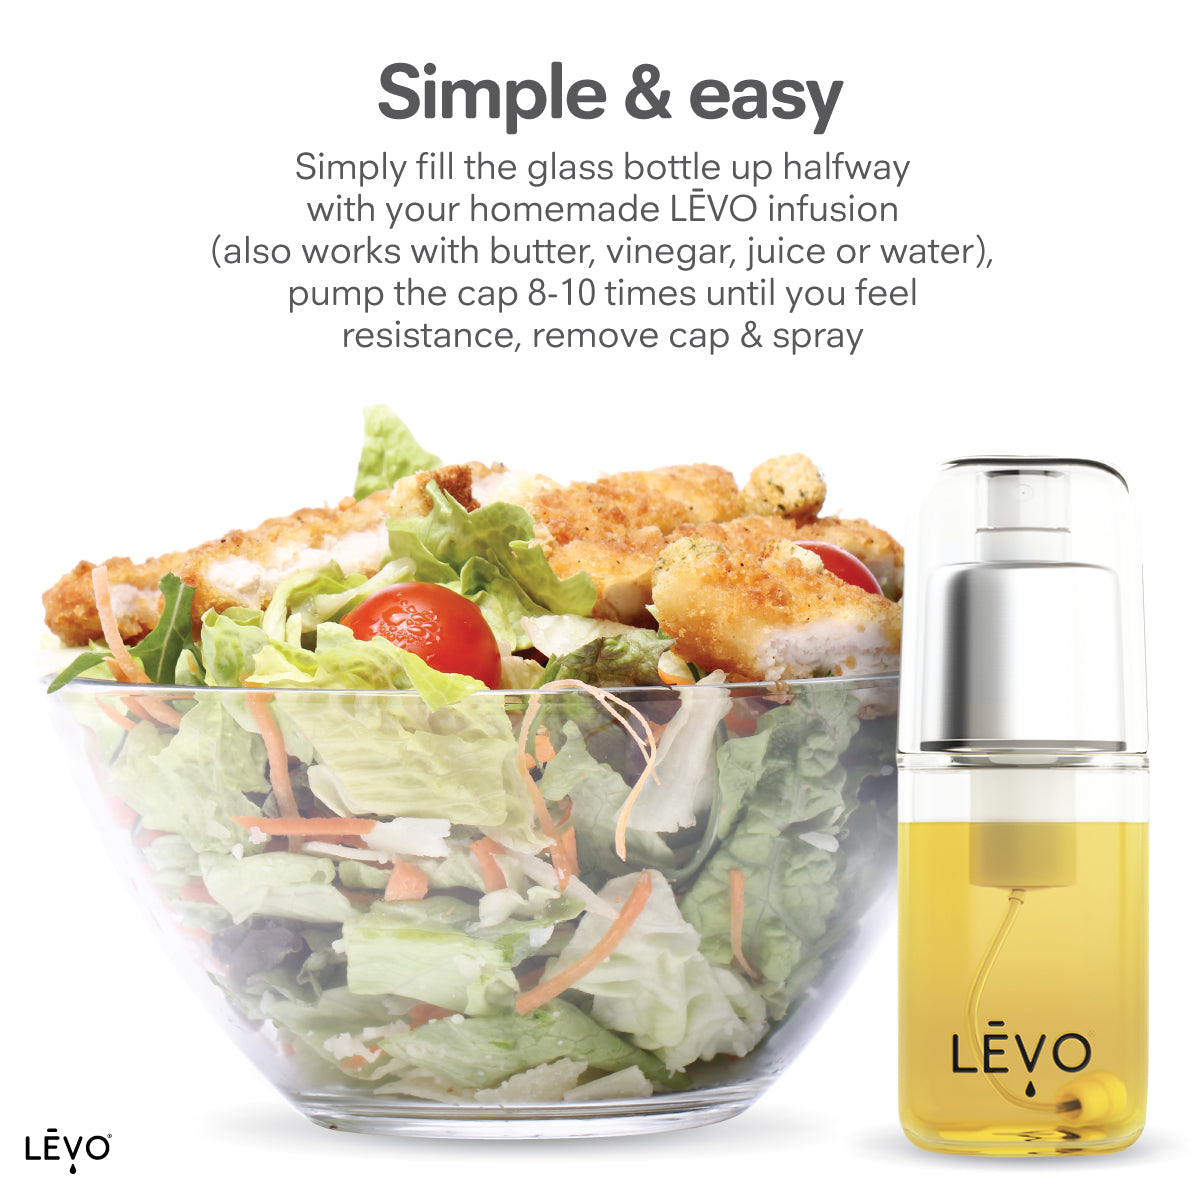 simply fill the glass bottle up halfway with your homemade DIY lēvo infusion. Also works with butter, vinegar, juice, or water.